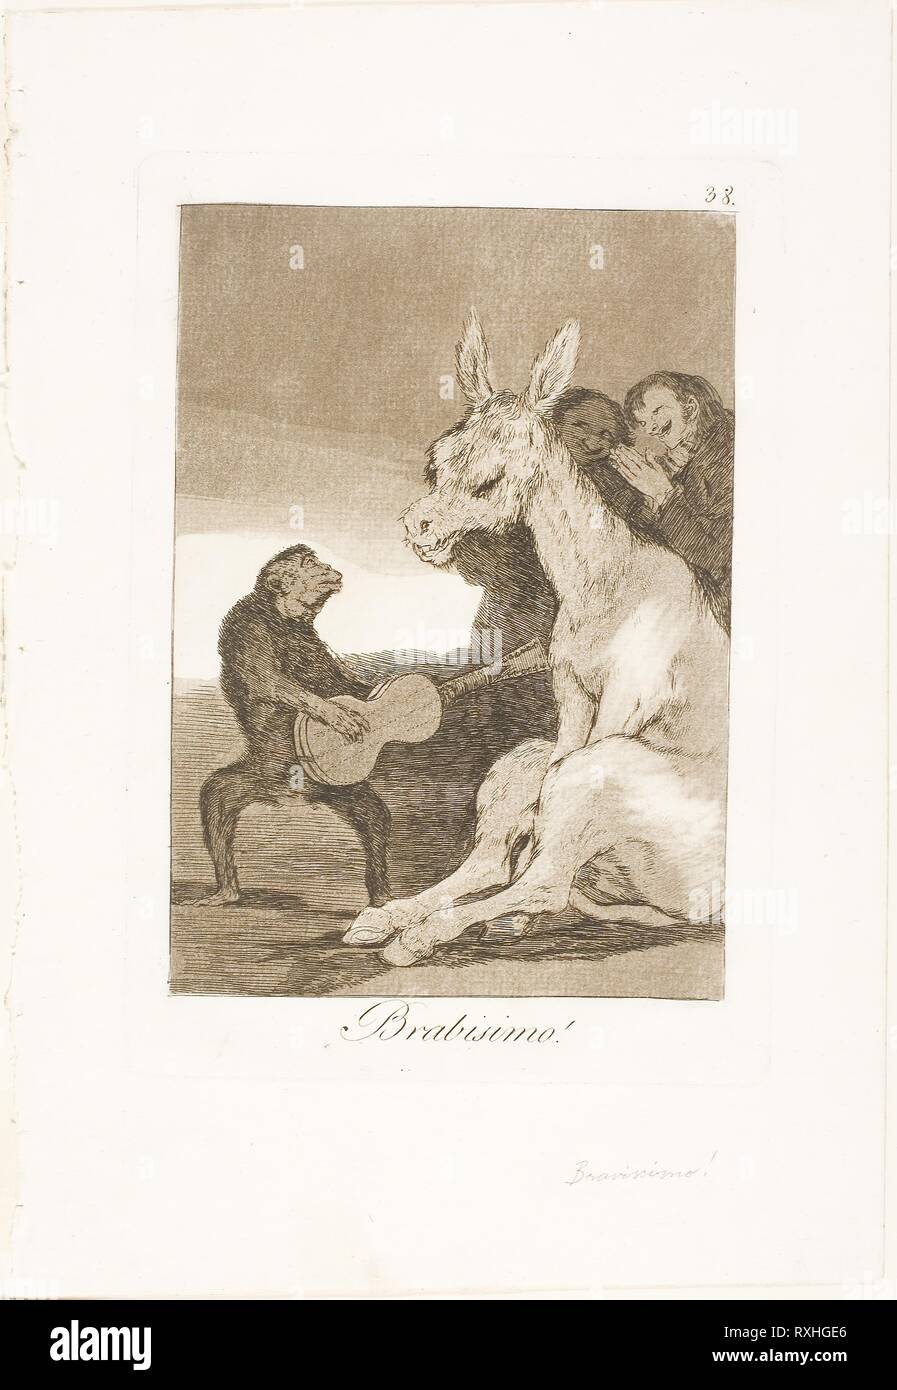 Bravo!, plate 38 from Los Caprichos. Francisco José de Goya y Lucientes; Spanish, 1746-1828. Date: 1797-1799. Dimensions: 185 x 130 mm (image); 216 x 151 mm (plate); 301 x 208 mm (sheet). Etching and aquatint on ivory laid paper. Origin: Spain. Museum: The Chicago Art Institute. Stock Photo